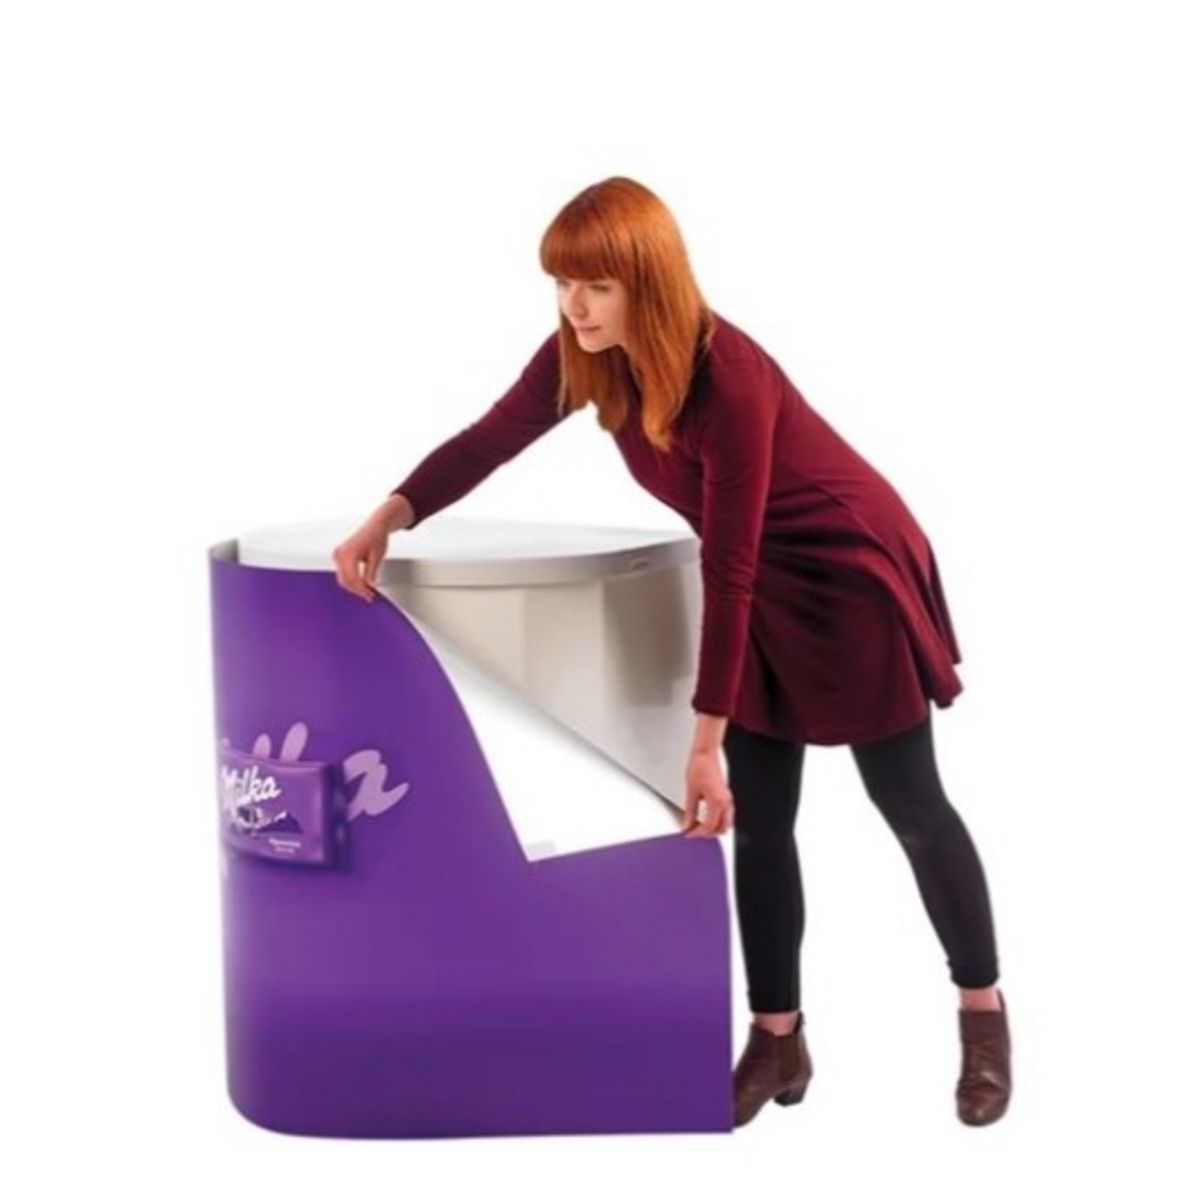 Lady attaching Milka graphic to the Rapido promotional display body panel..jpg